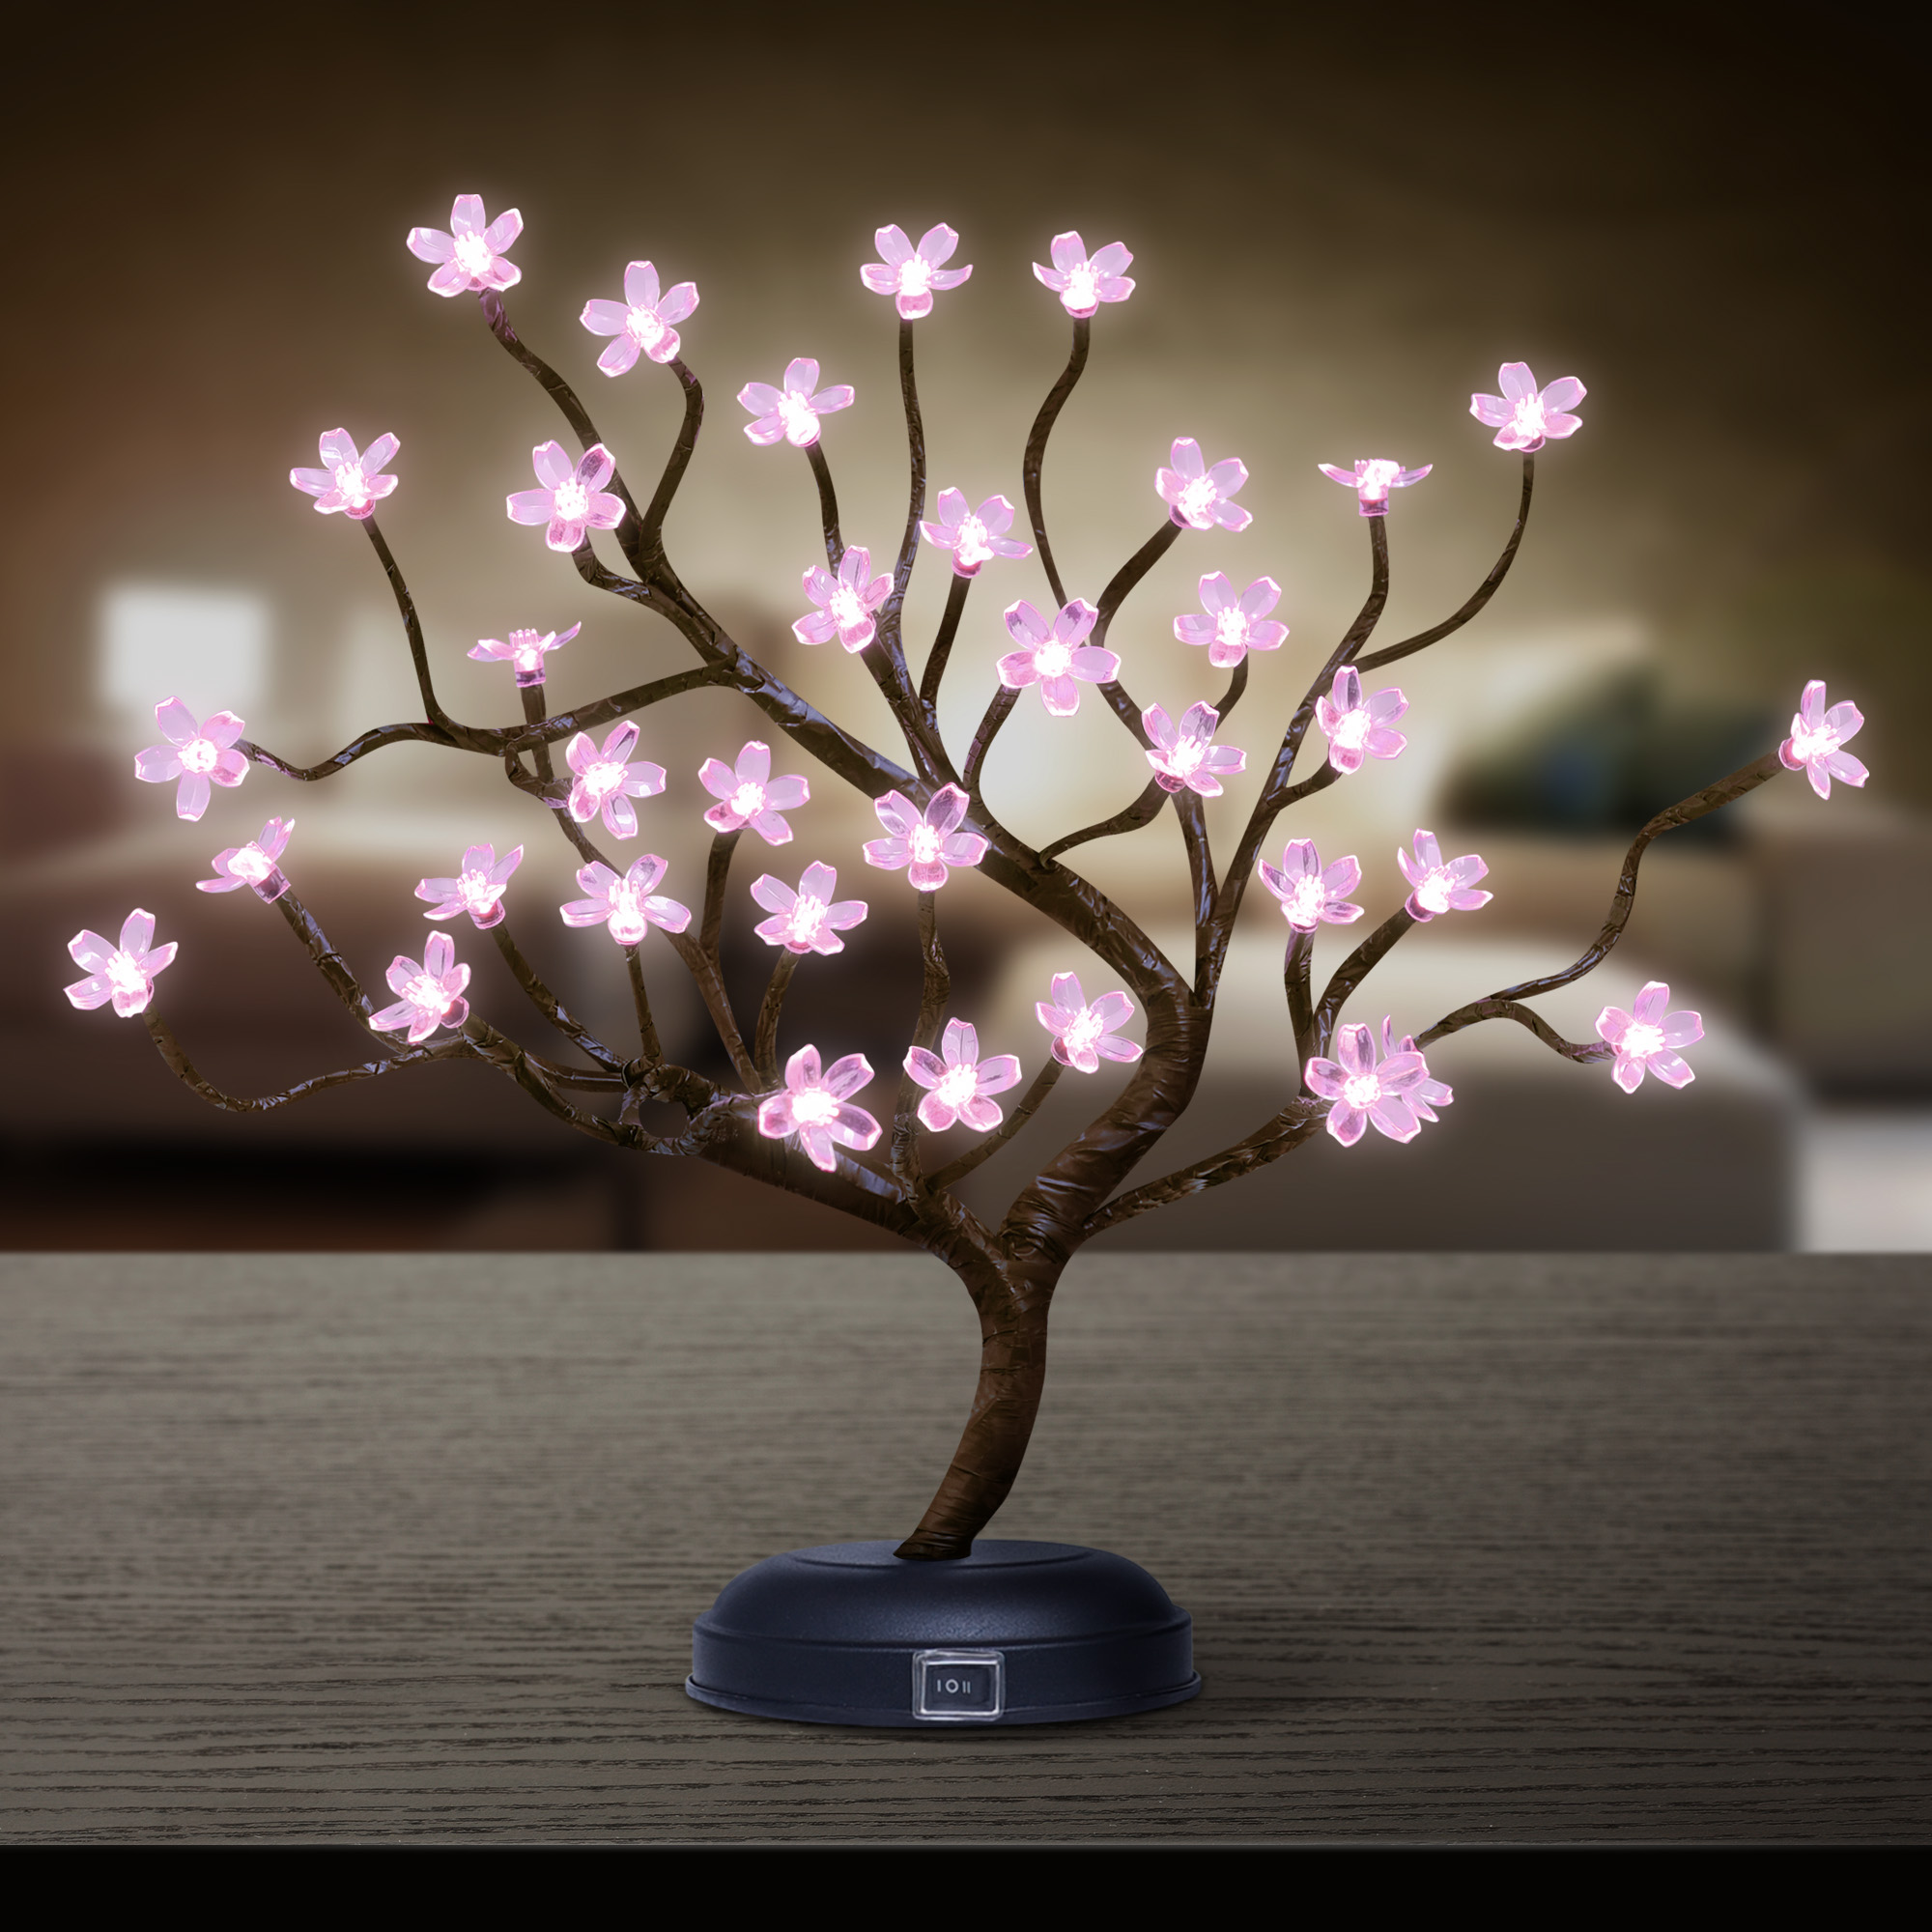 16IN Cherry Blossom Tree Lamp, Powered by Batteries & Adapter (included), Built-in timer